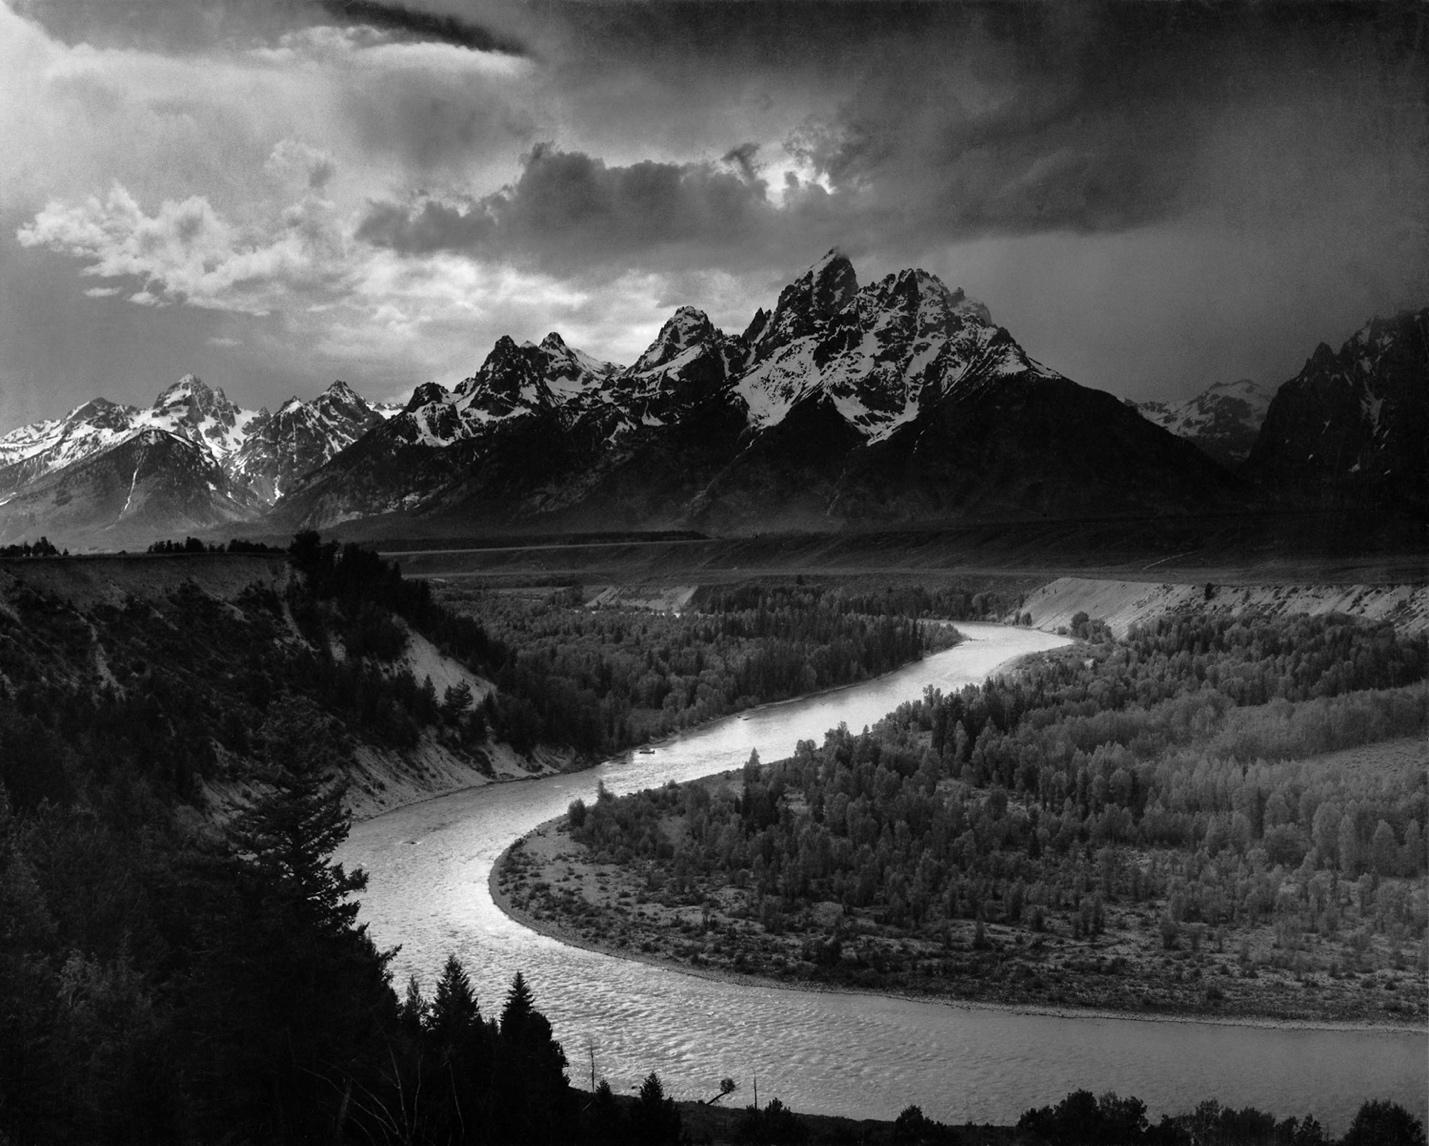 Tetons and the Snake River